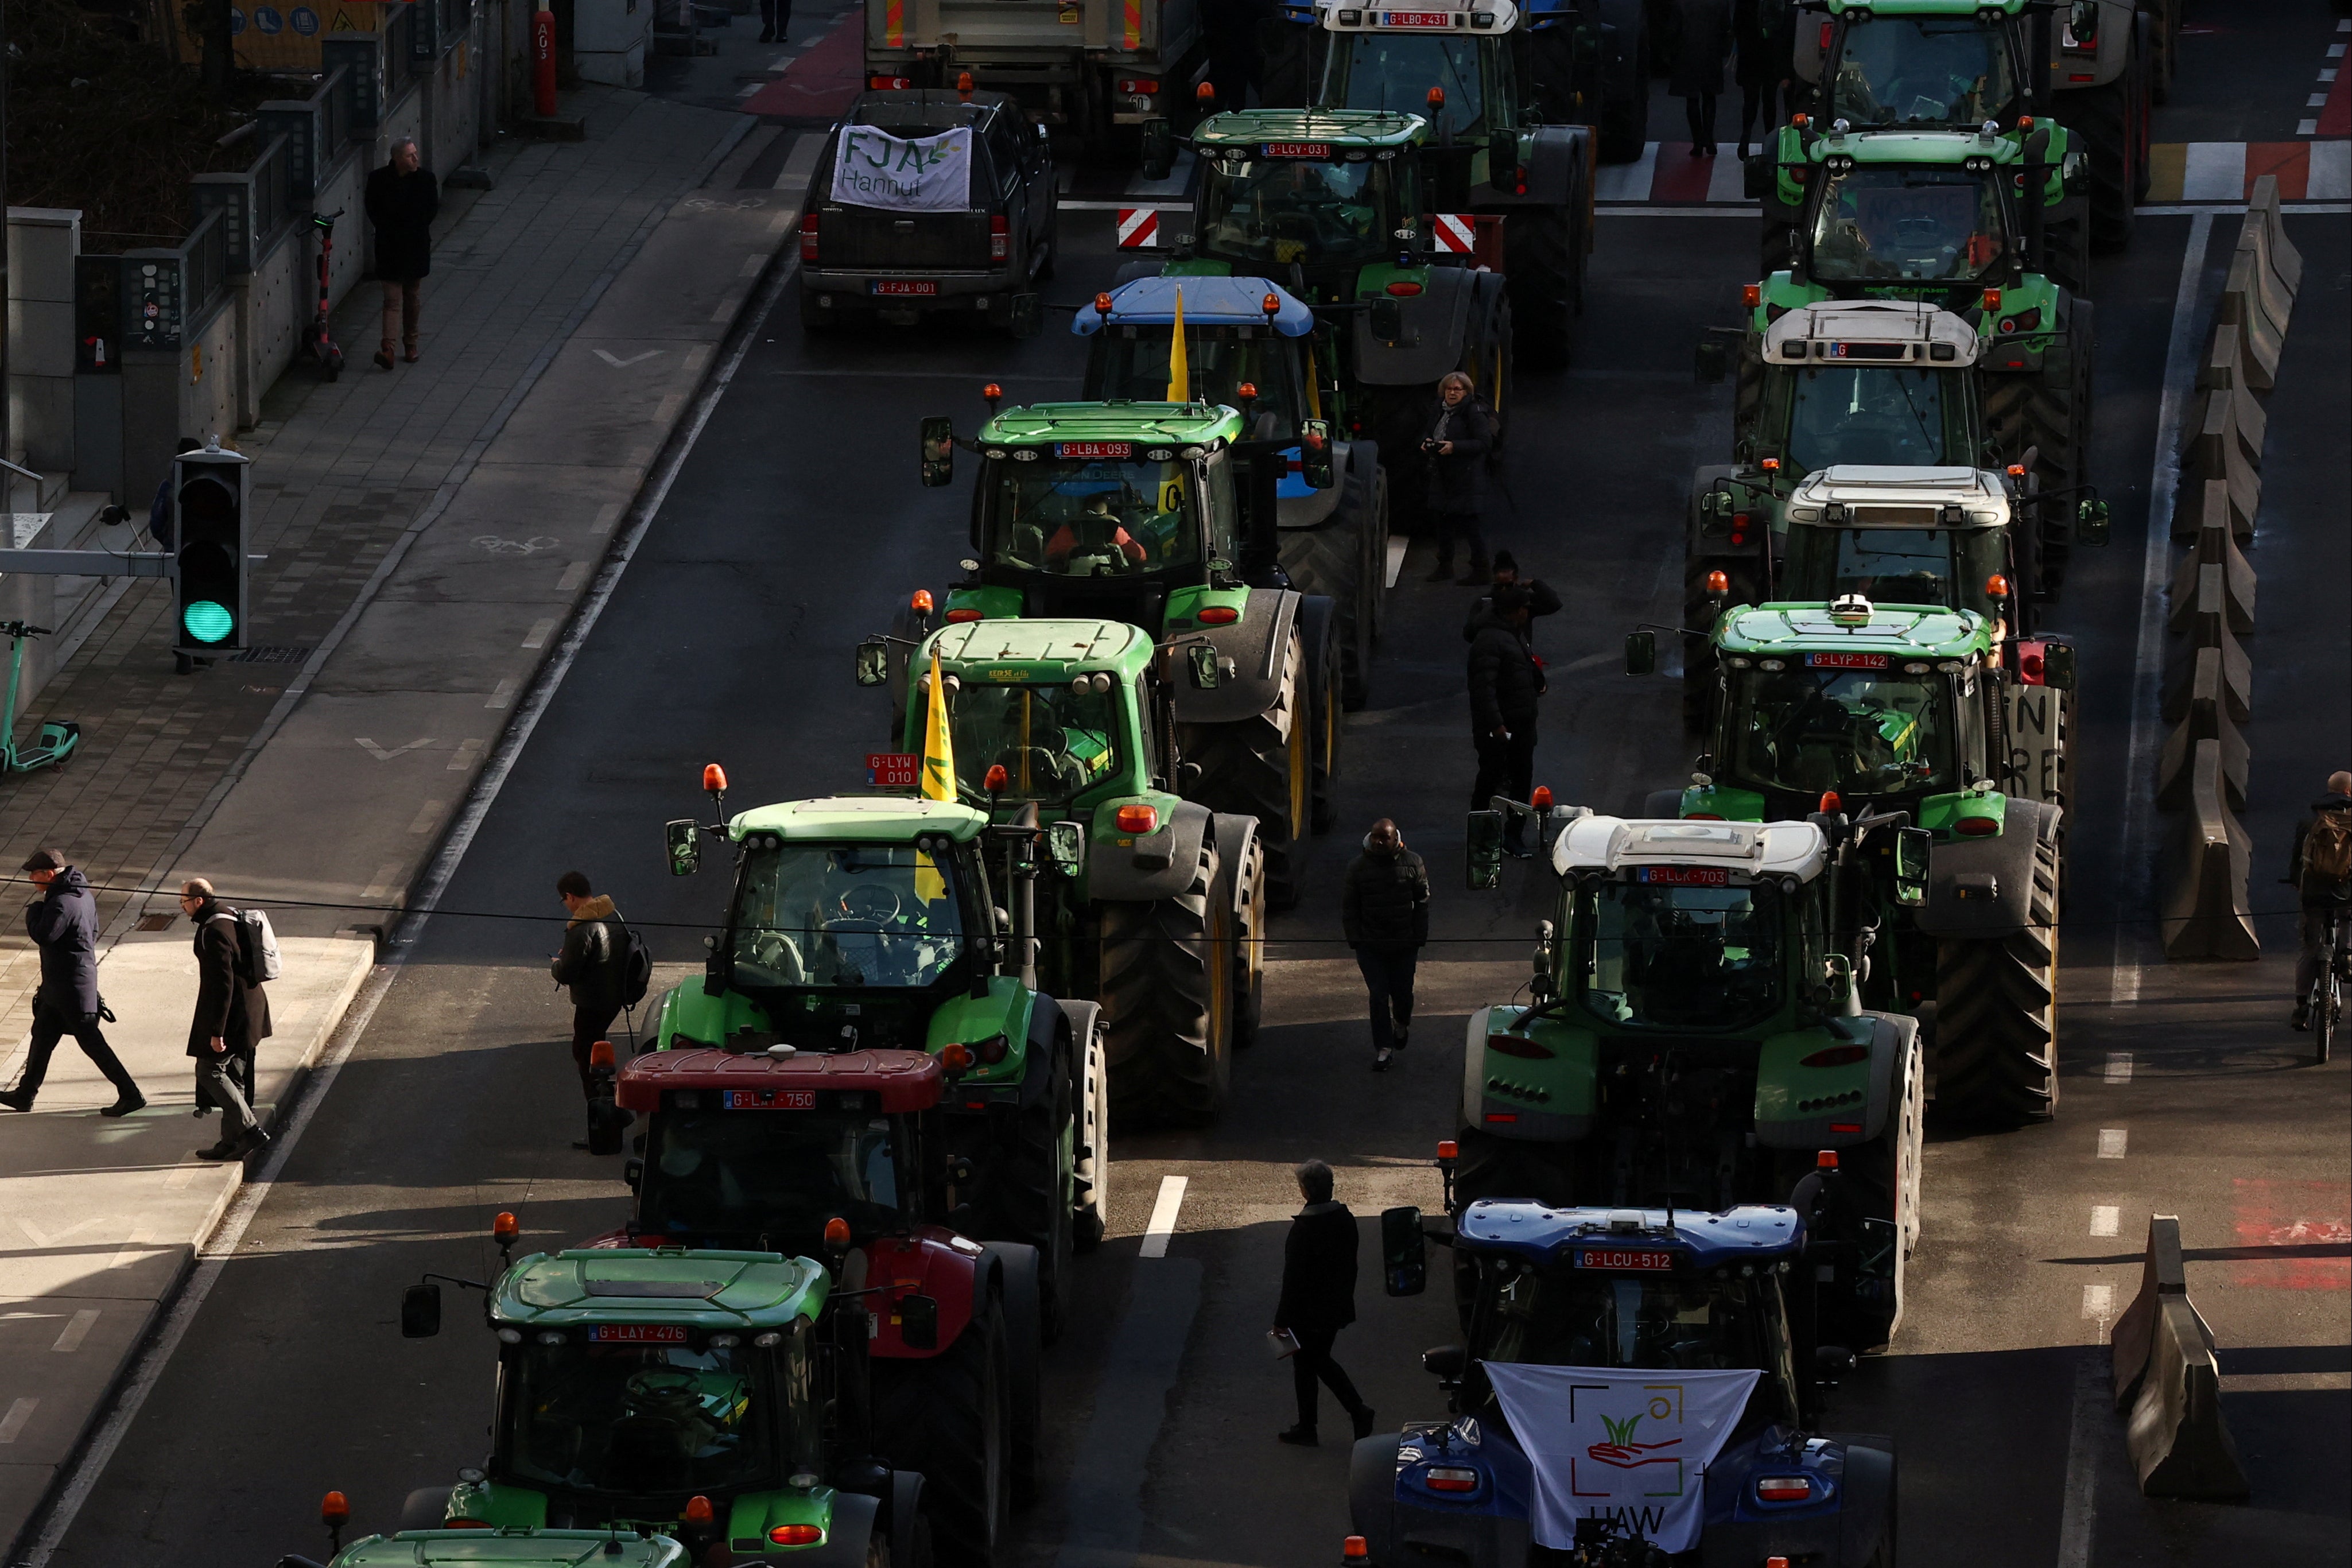 Belgian farmers block a road with tractors near the European parliament